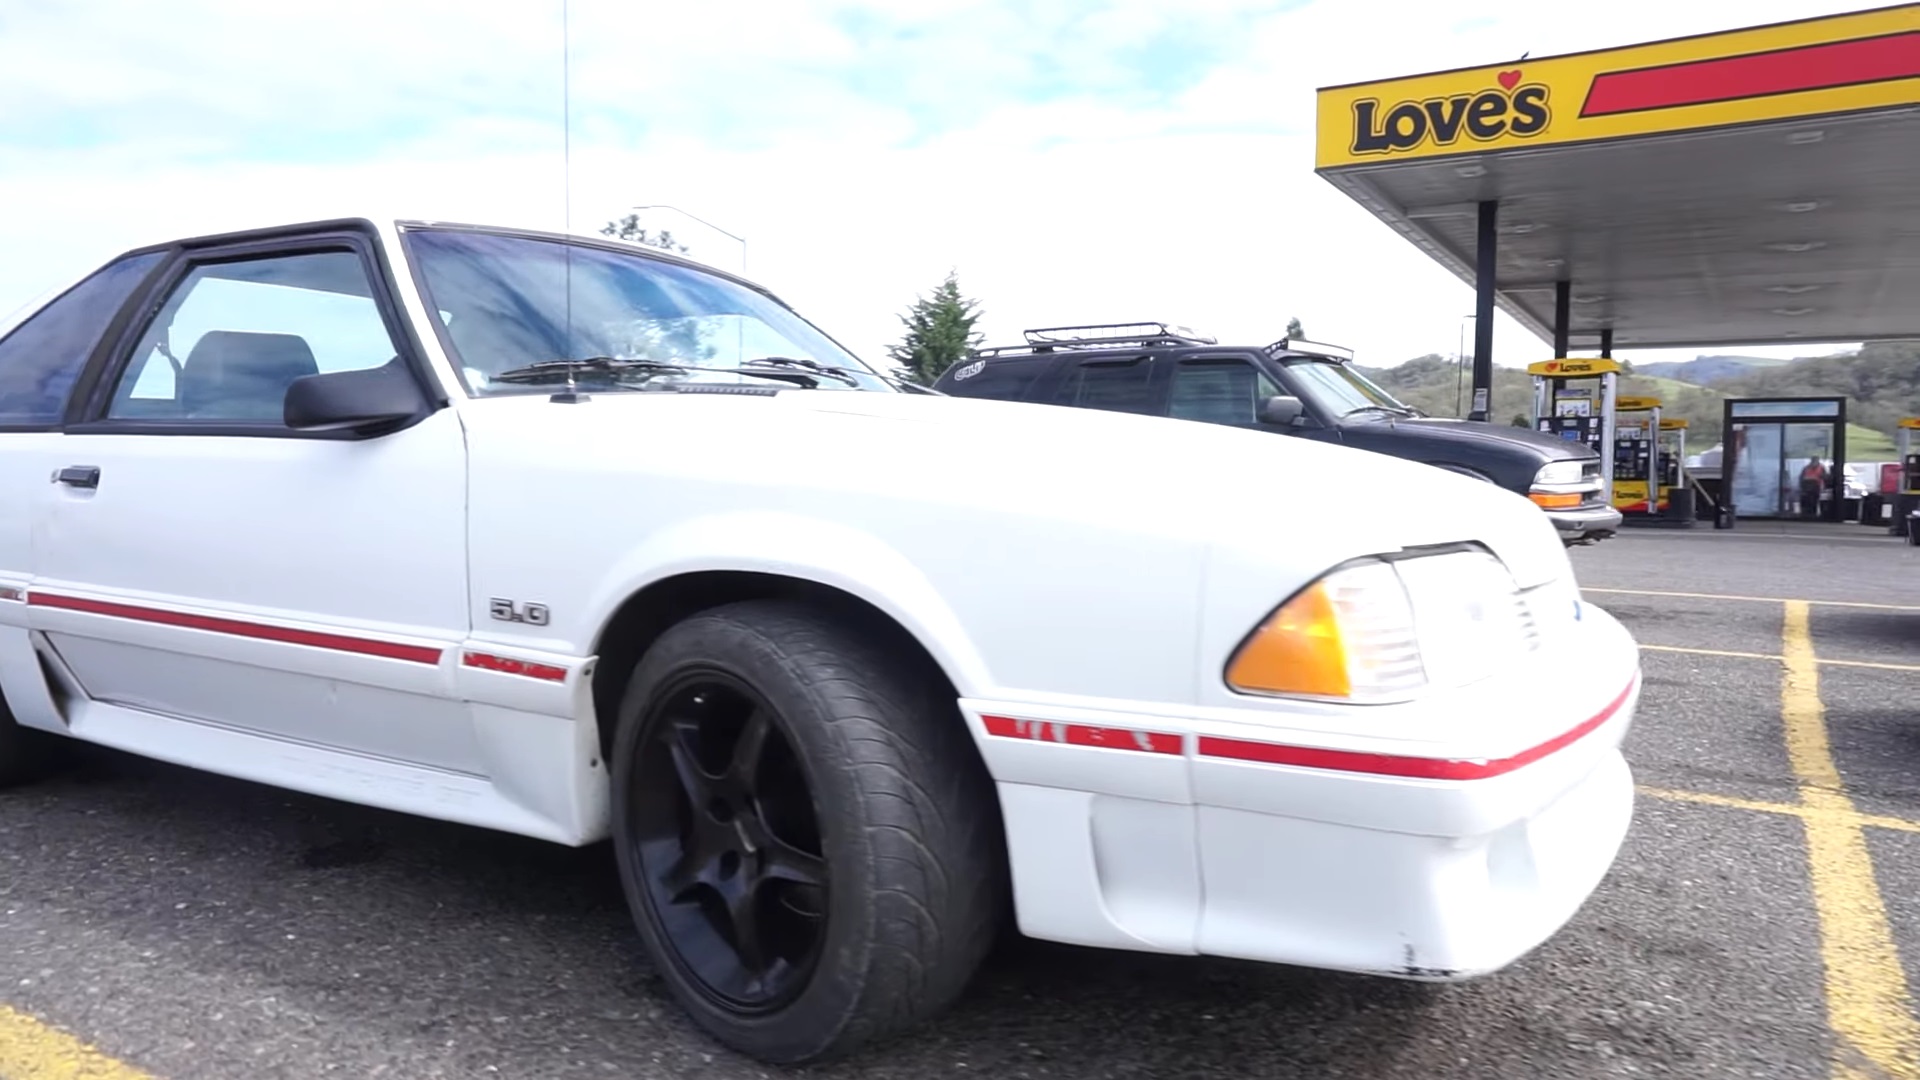 Video: 1988 Ford Mustang GT Fox Body 5.0 Crazy Burnouts